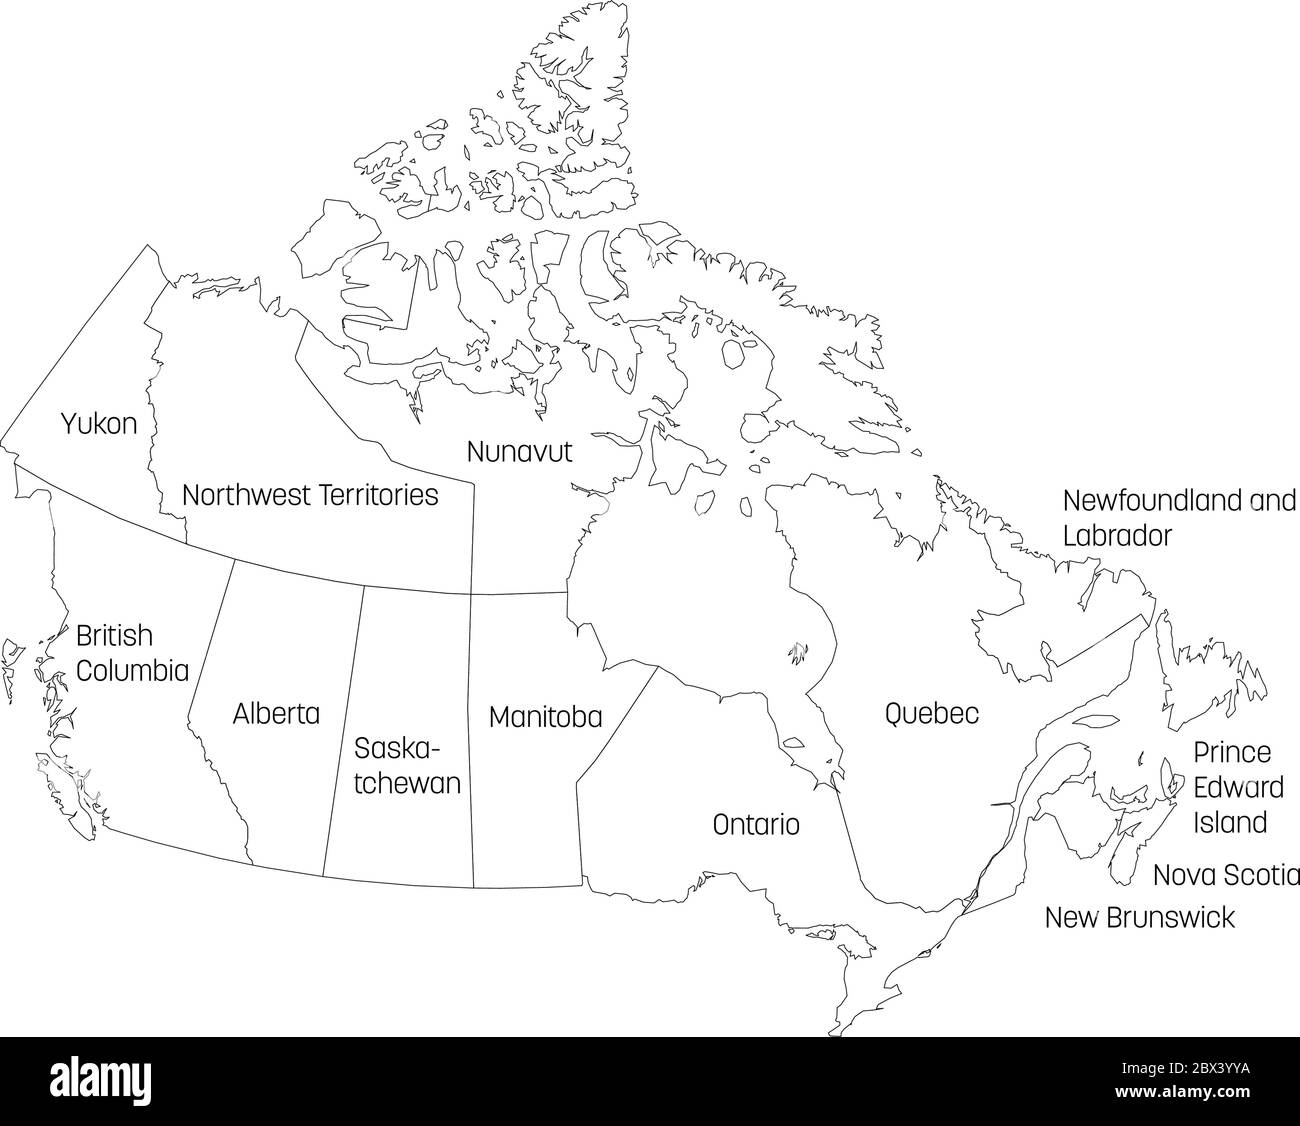 Map of Canada divided into 10 provinces and 3 territories. Administrative regions of Canada. White map with black outline and black region name labels. Vector illustration. Stock Vector